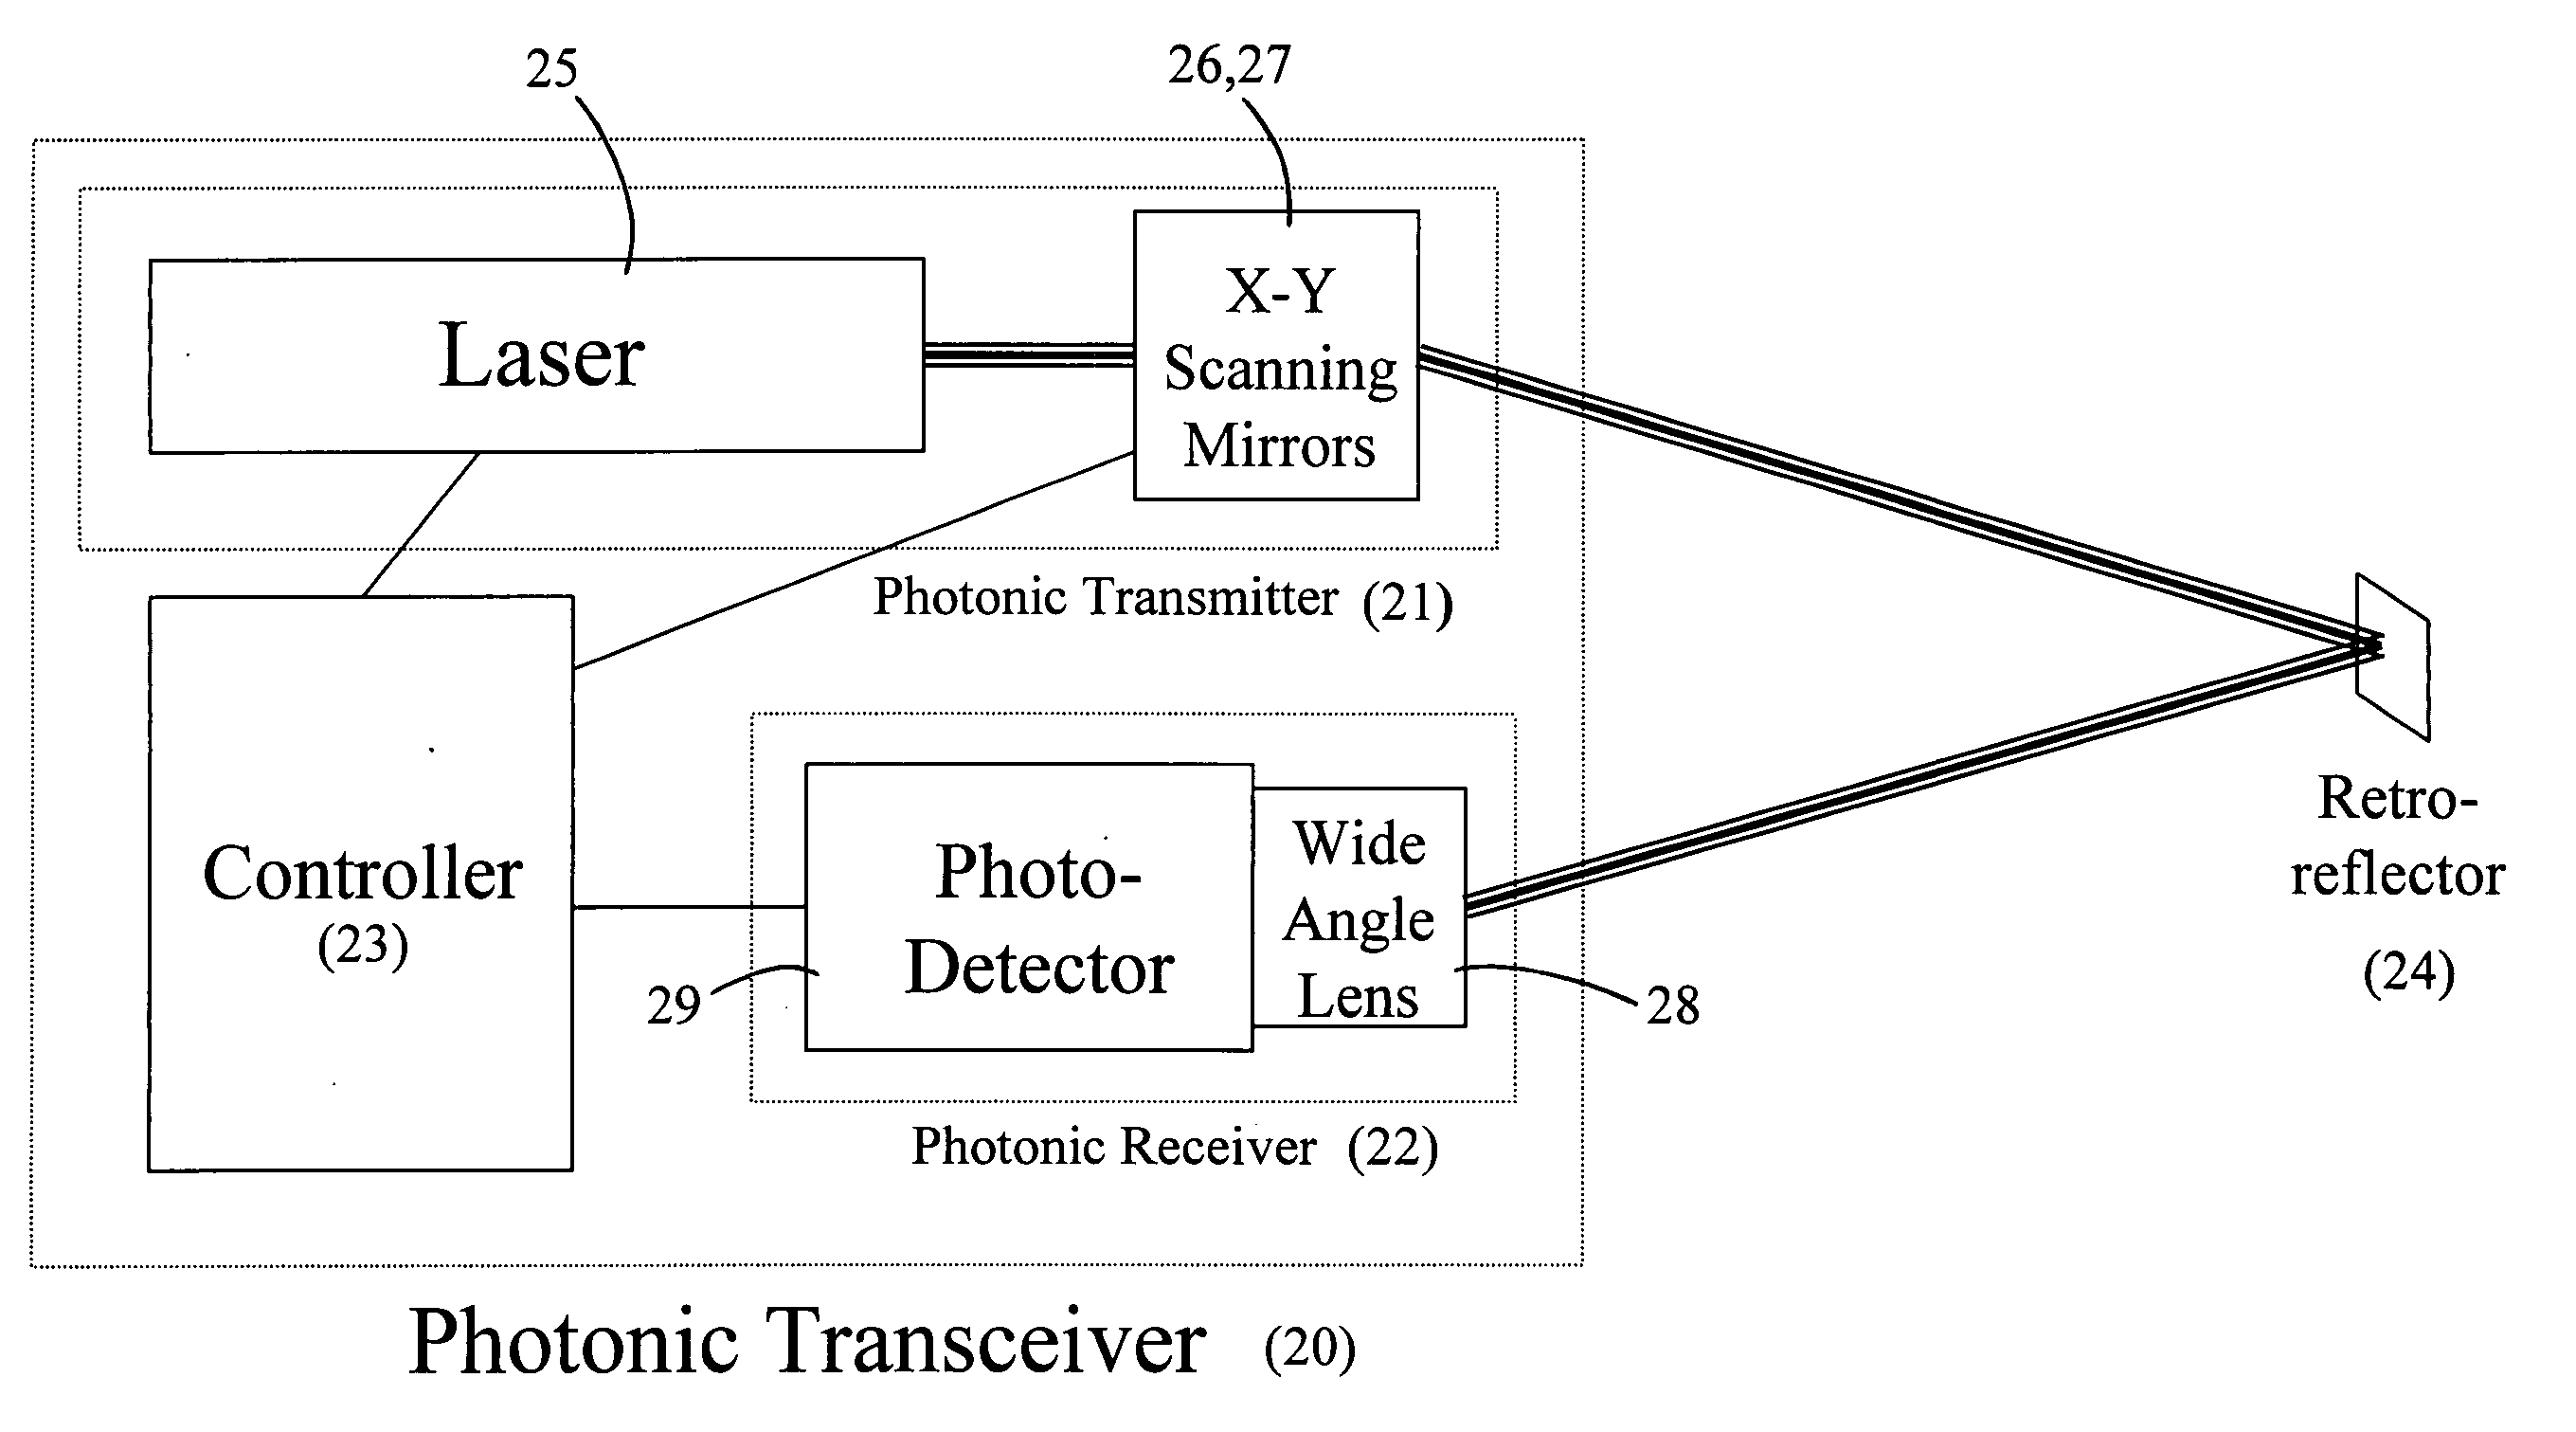 Laser scanning system for object monitoring